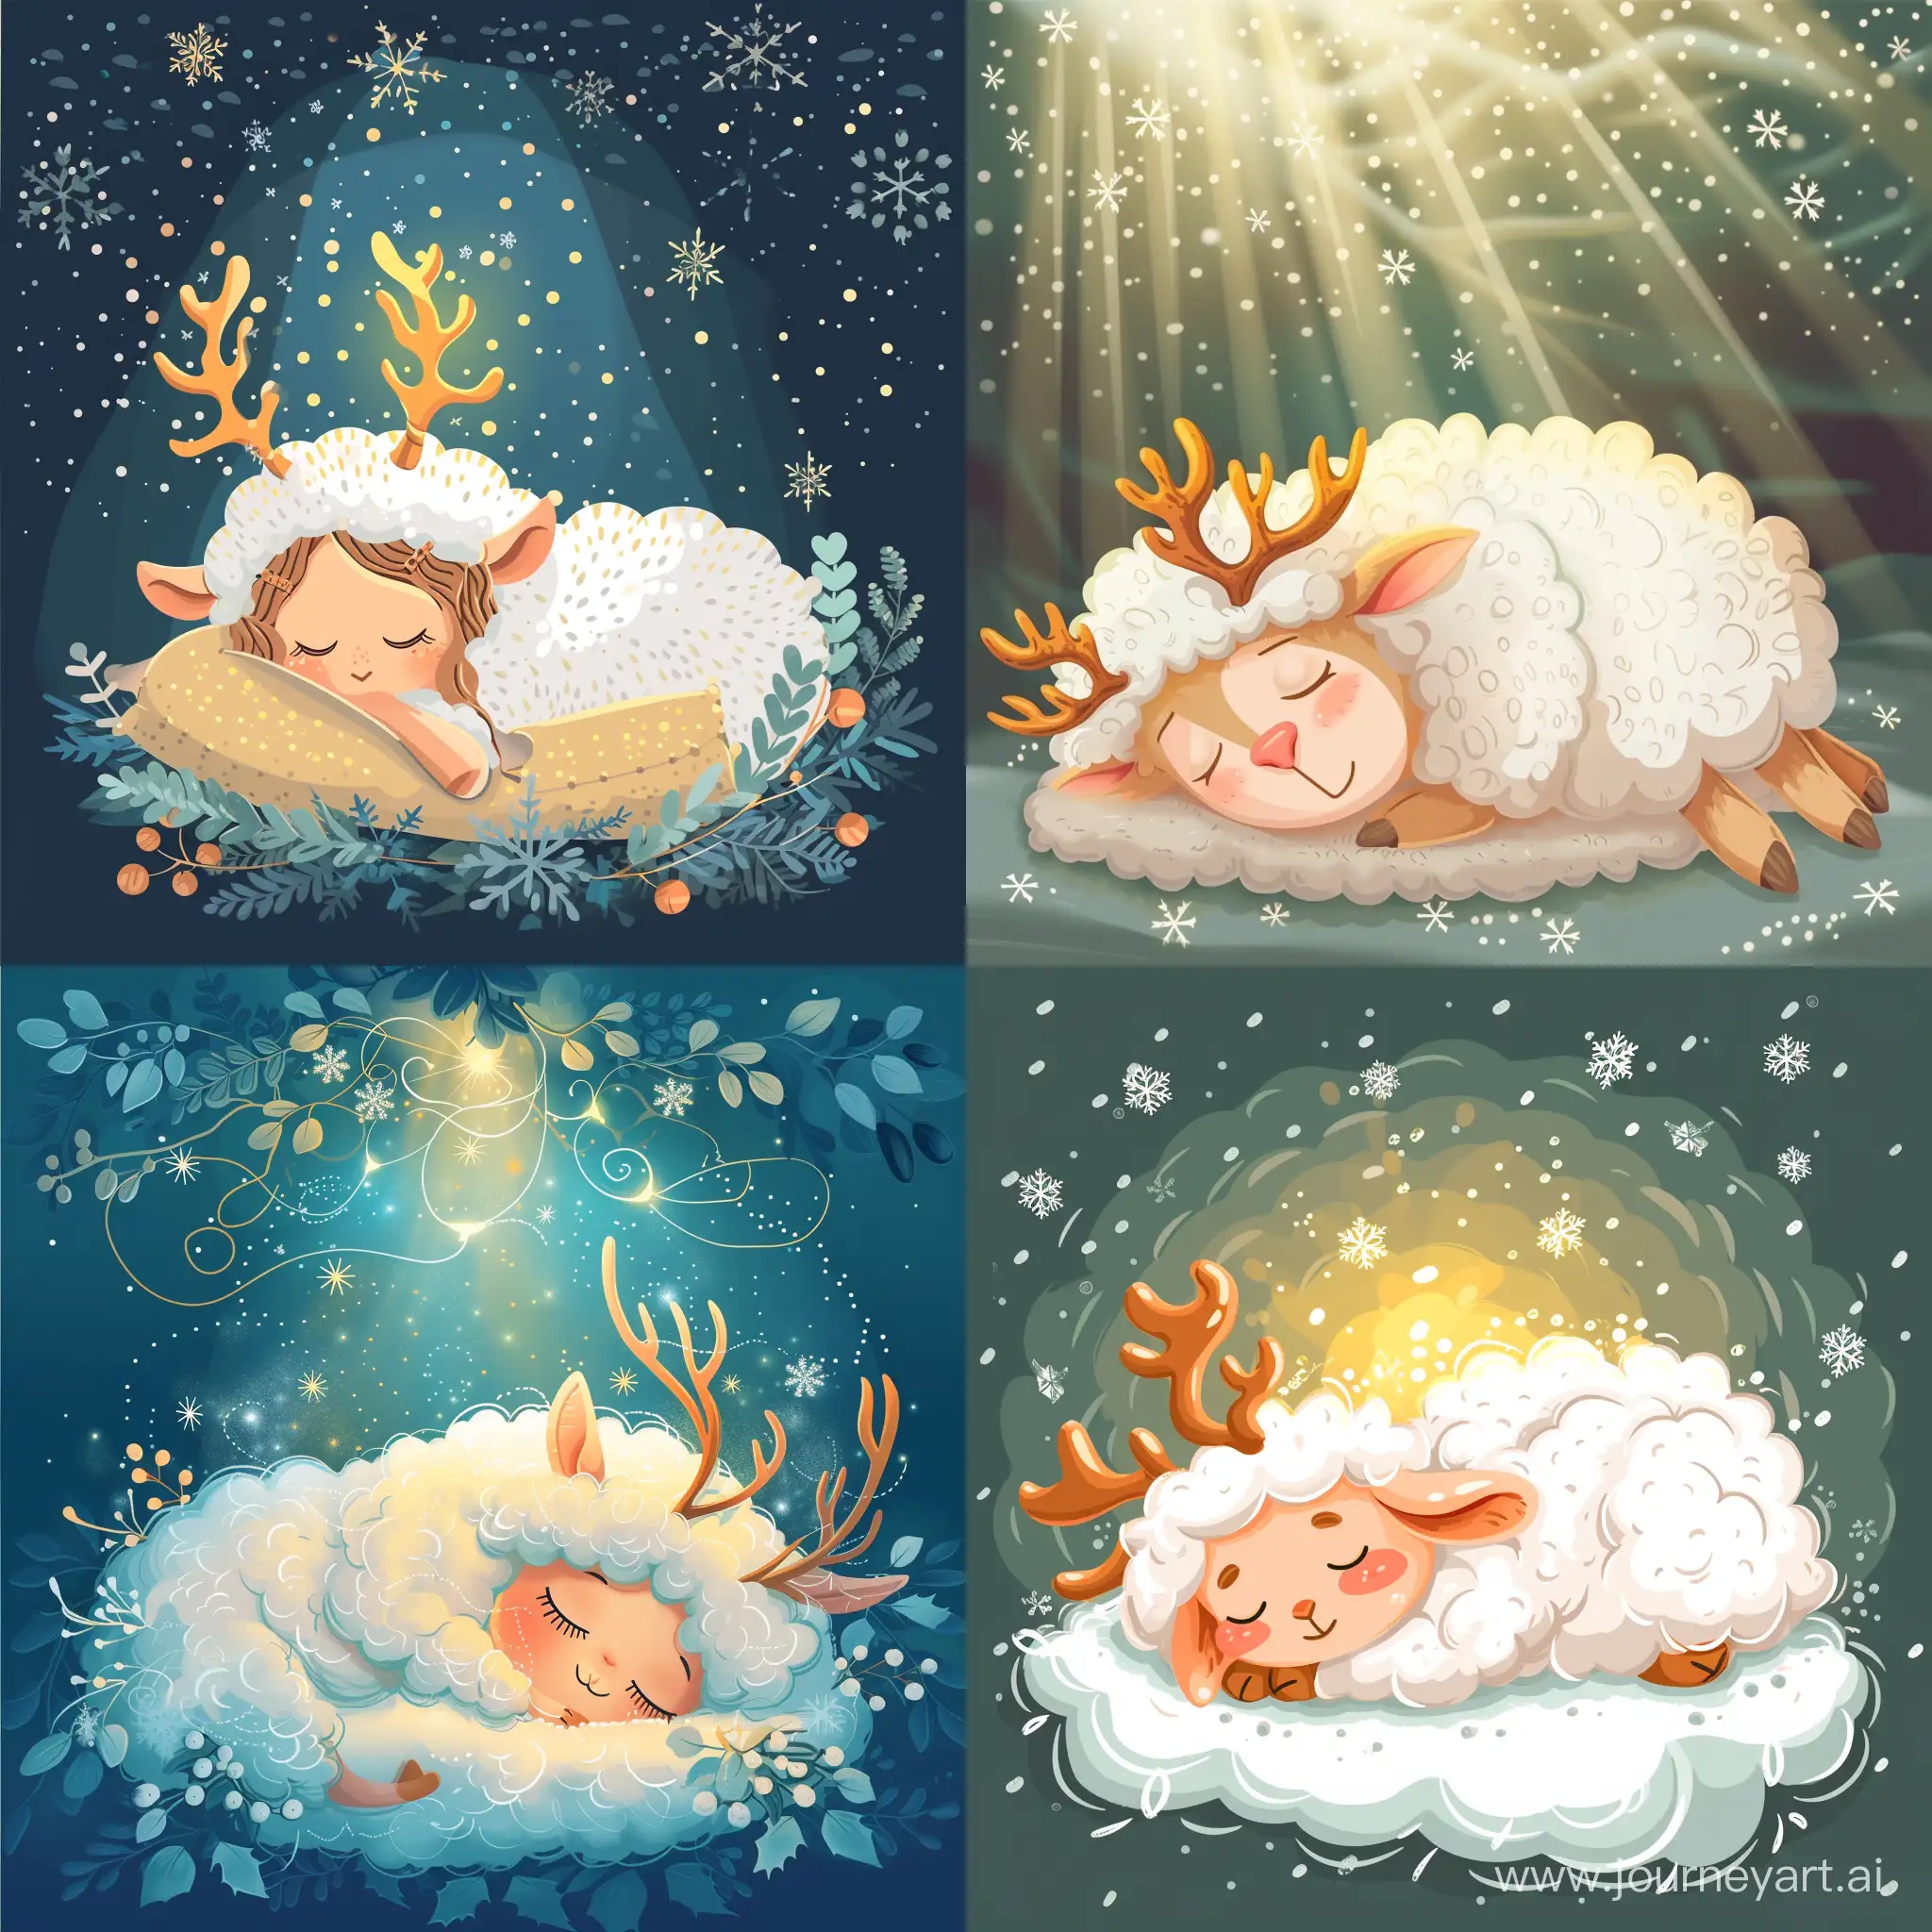 a sleeping sheep princess, little antlers, cozy athmosphere, mysterious light, snowflakes, in cartoon flat style